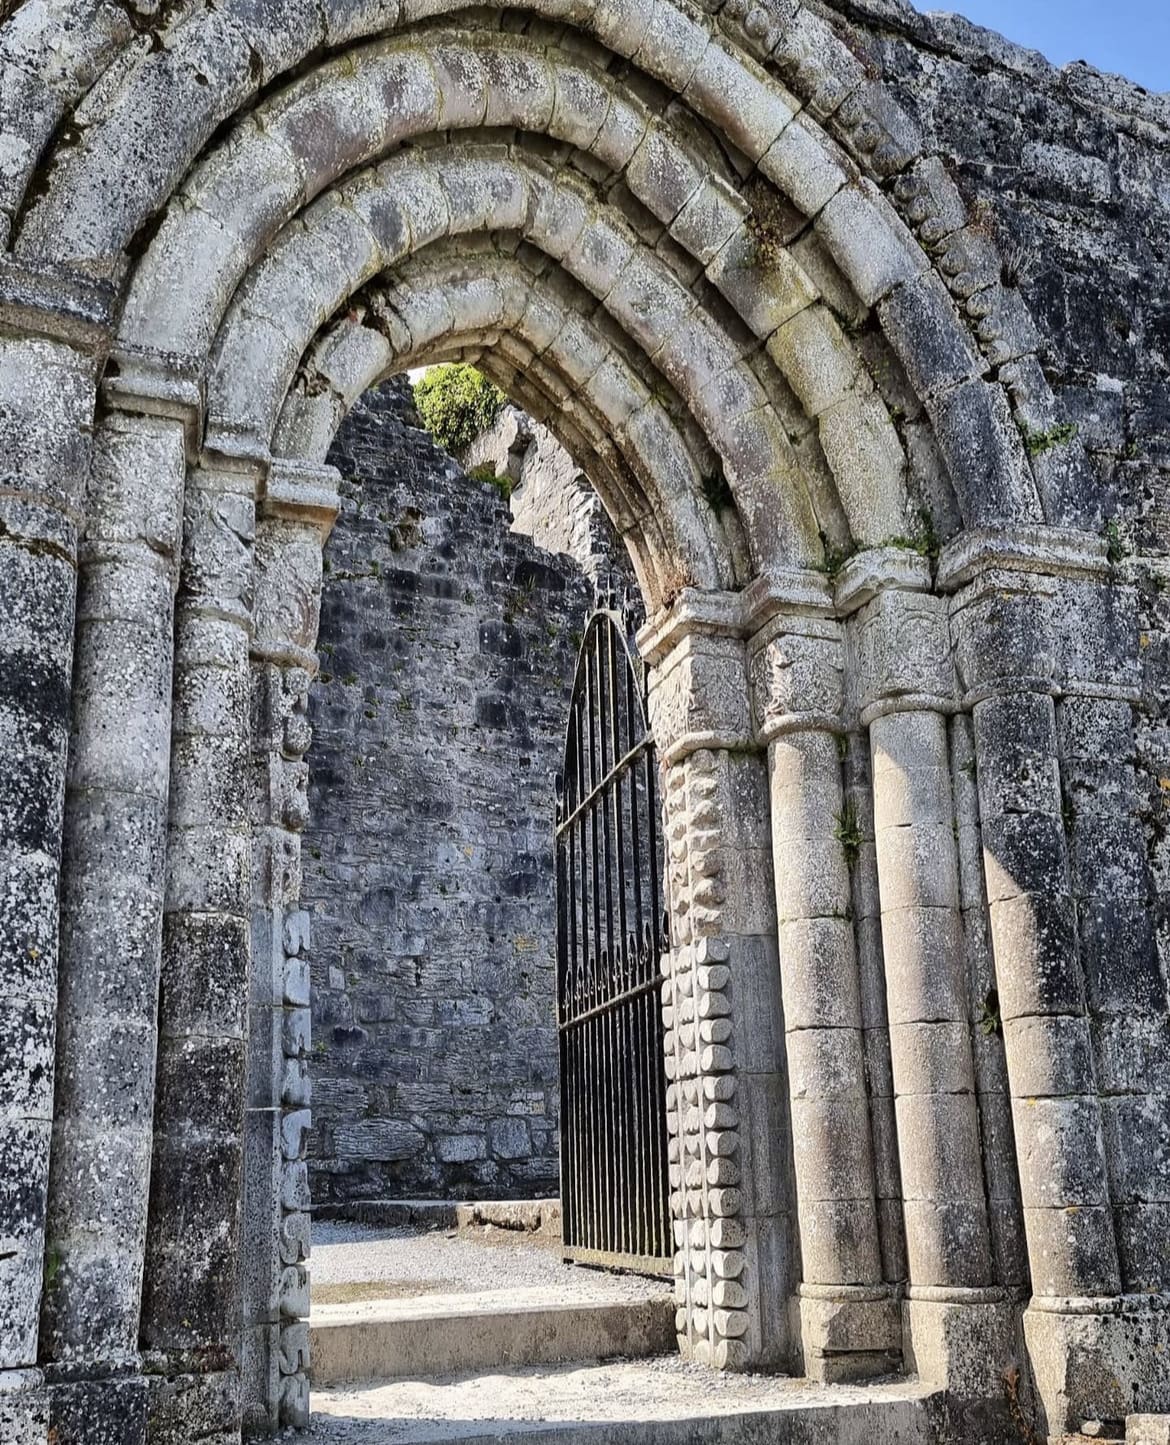 The doorway into Cong Abbey